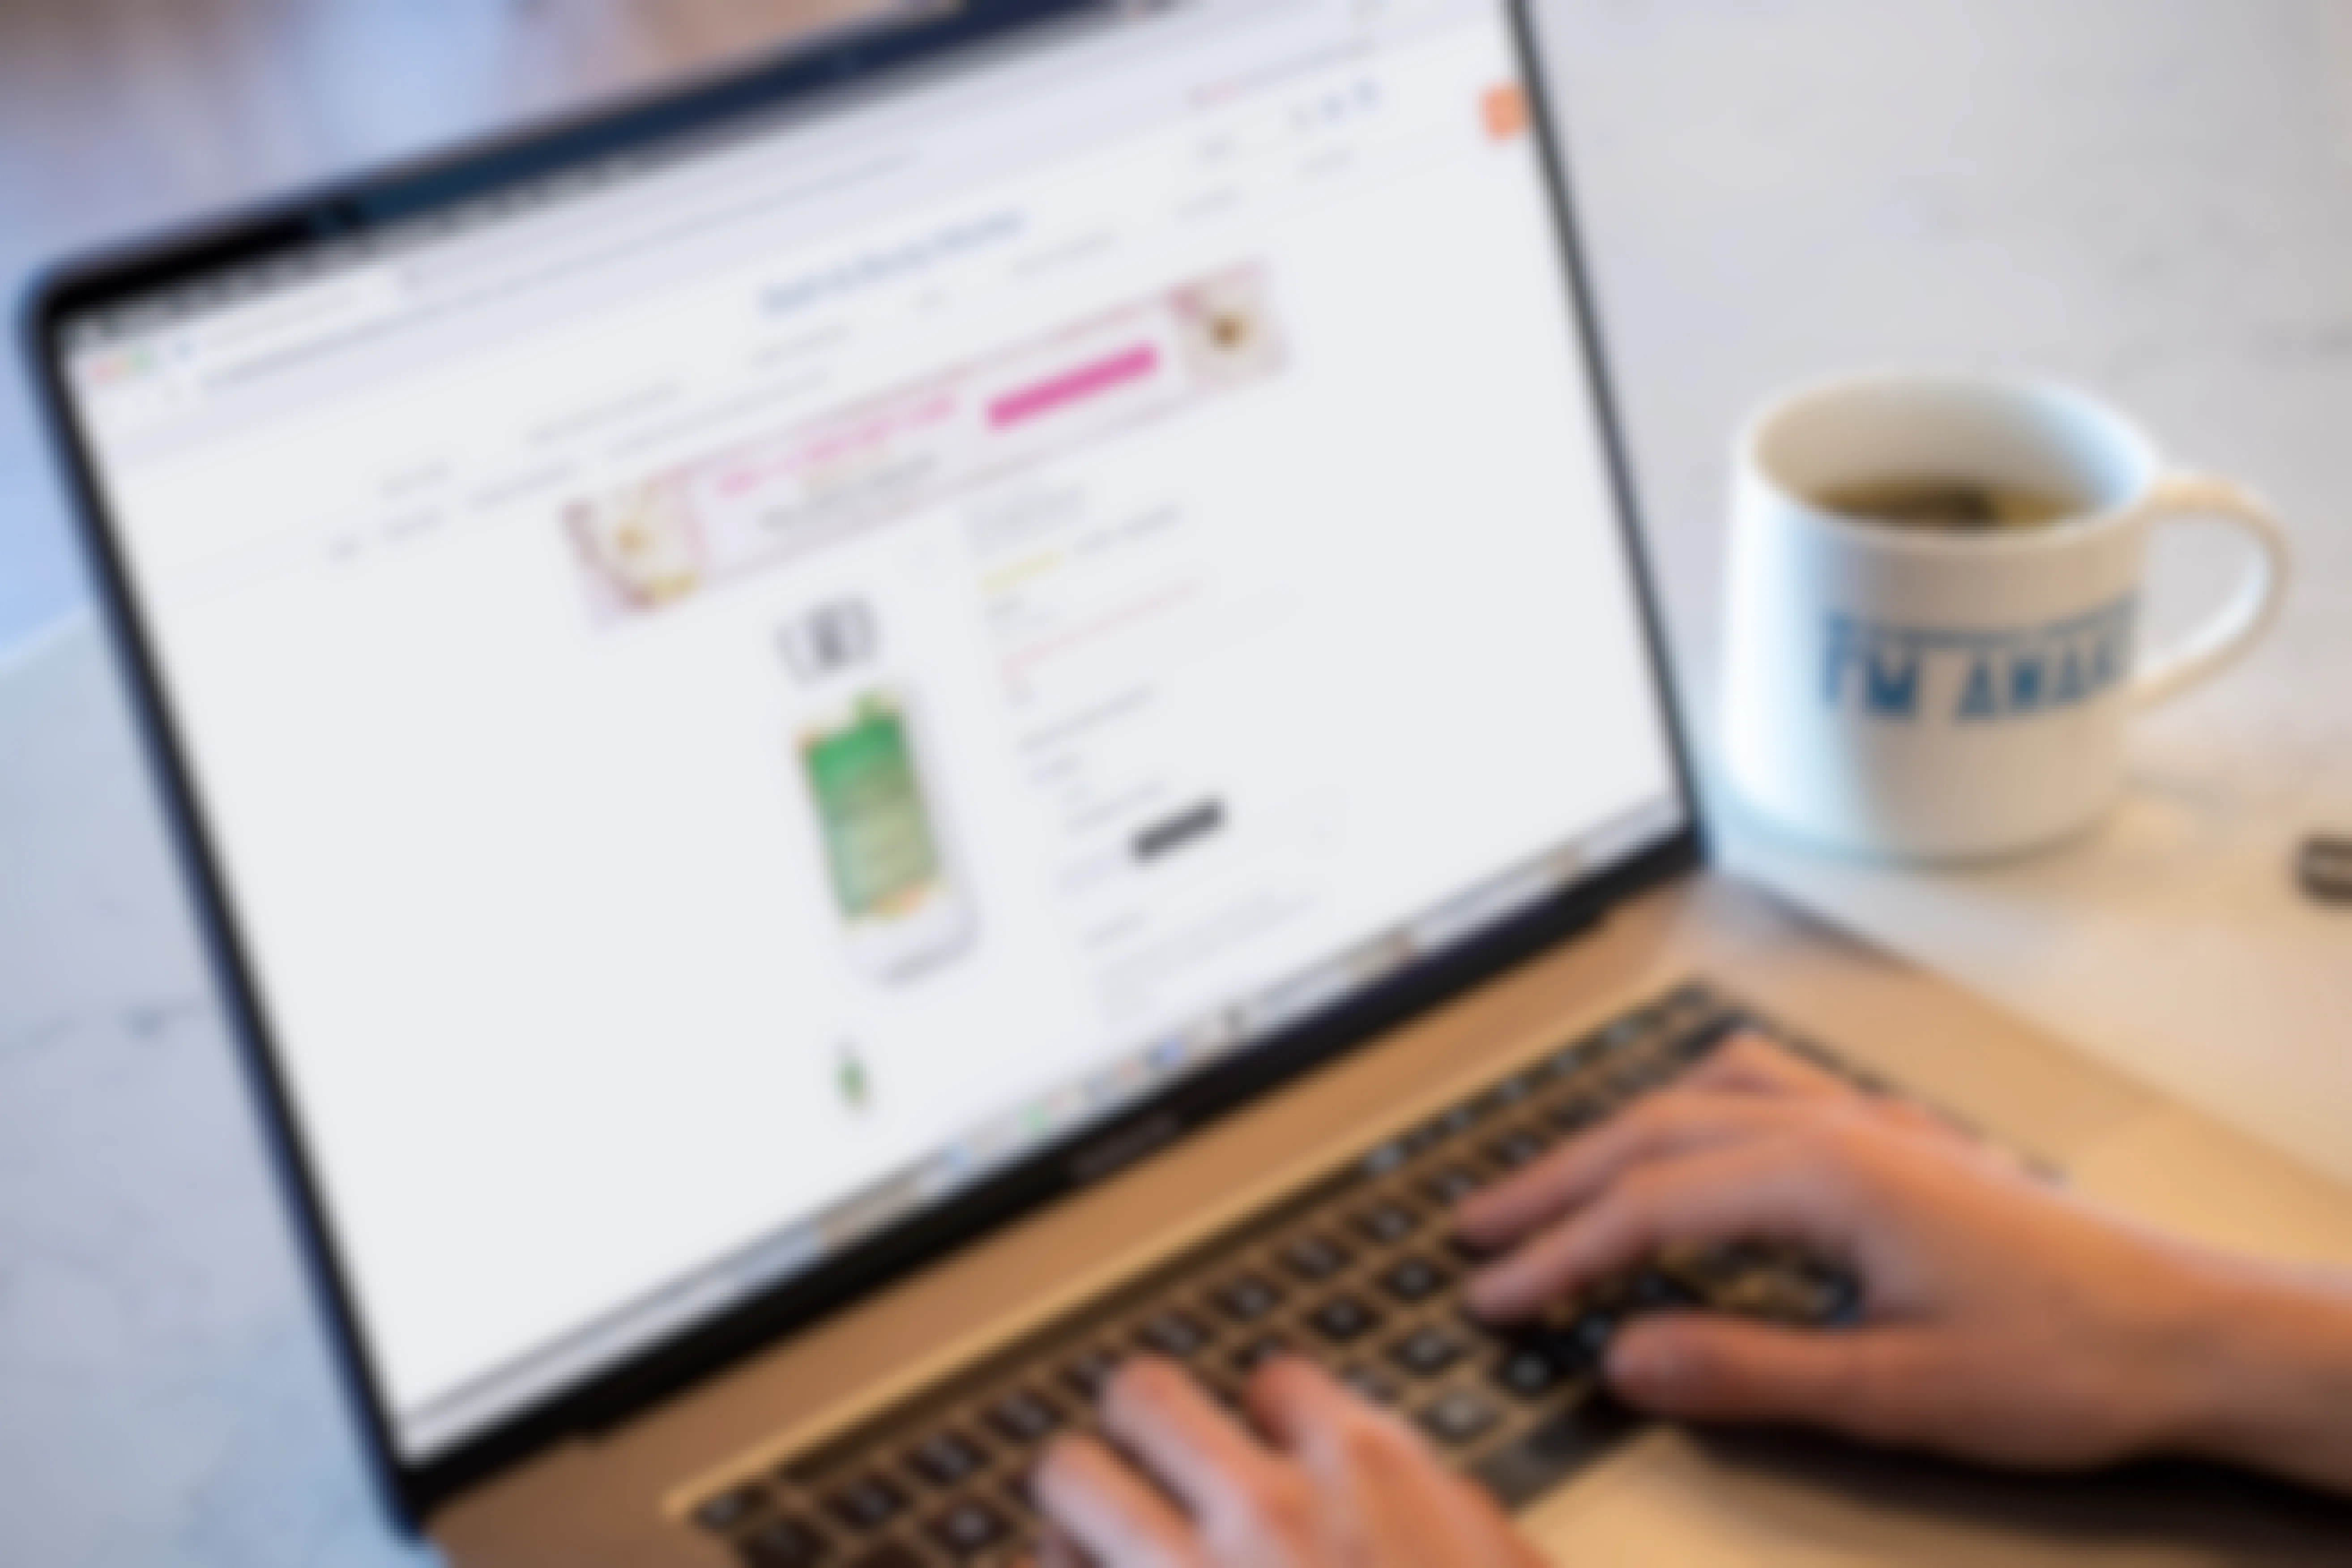 A person using a computer with Bathandbodyworks.com on the screen.